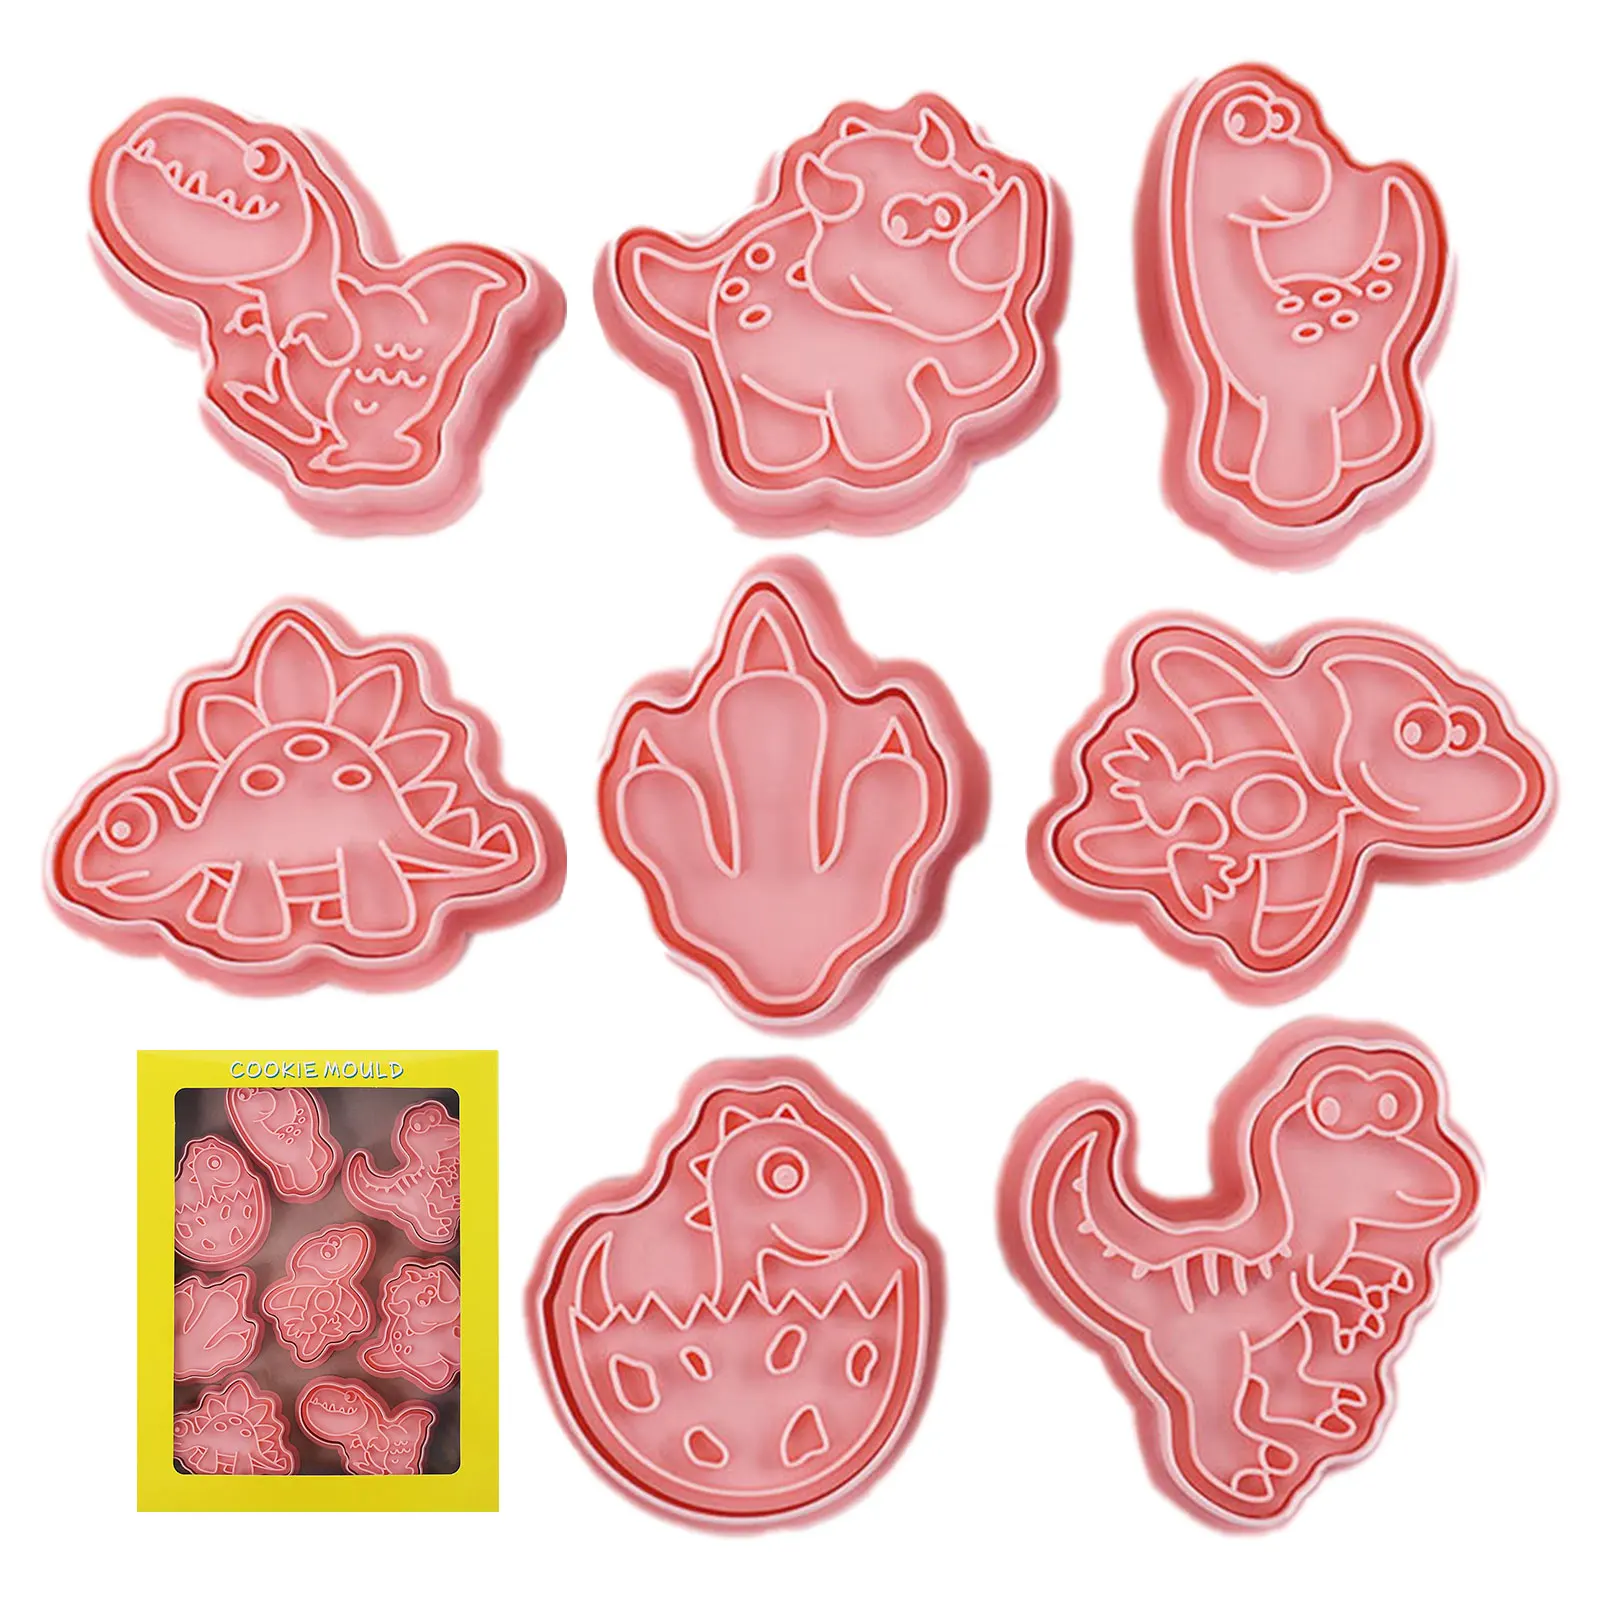 

8Pcs 3D Cartoon Pressable Biscuit Mold Dinosaur Shape Cookie Cutters Stamps Set Cookie Stamp Kitchen Baking Pastry Bakeware